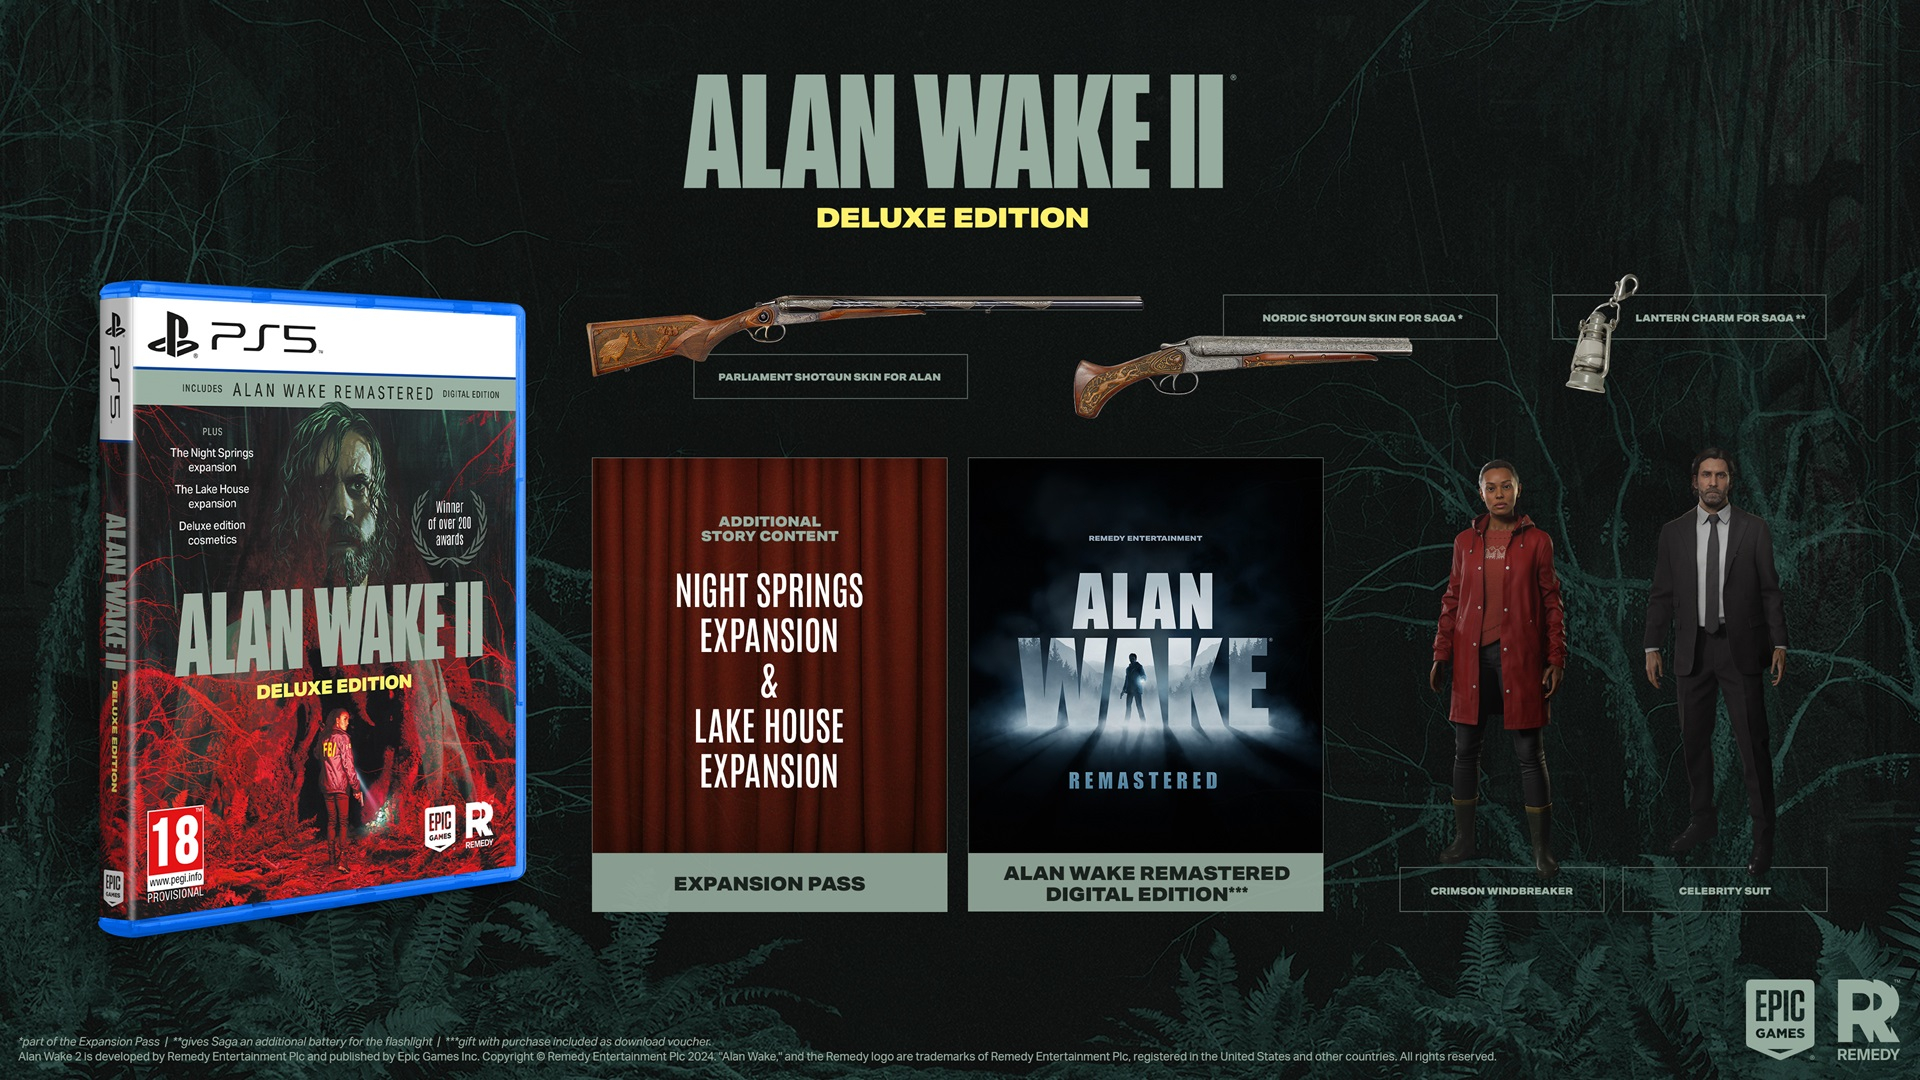  Alan Wake 2 - Deluxe Edition 